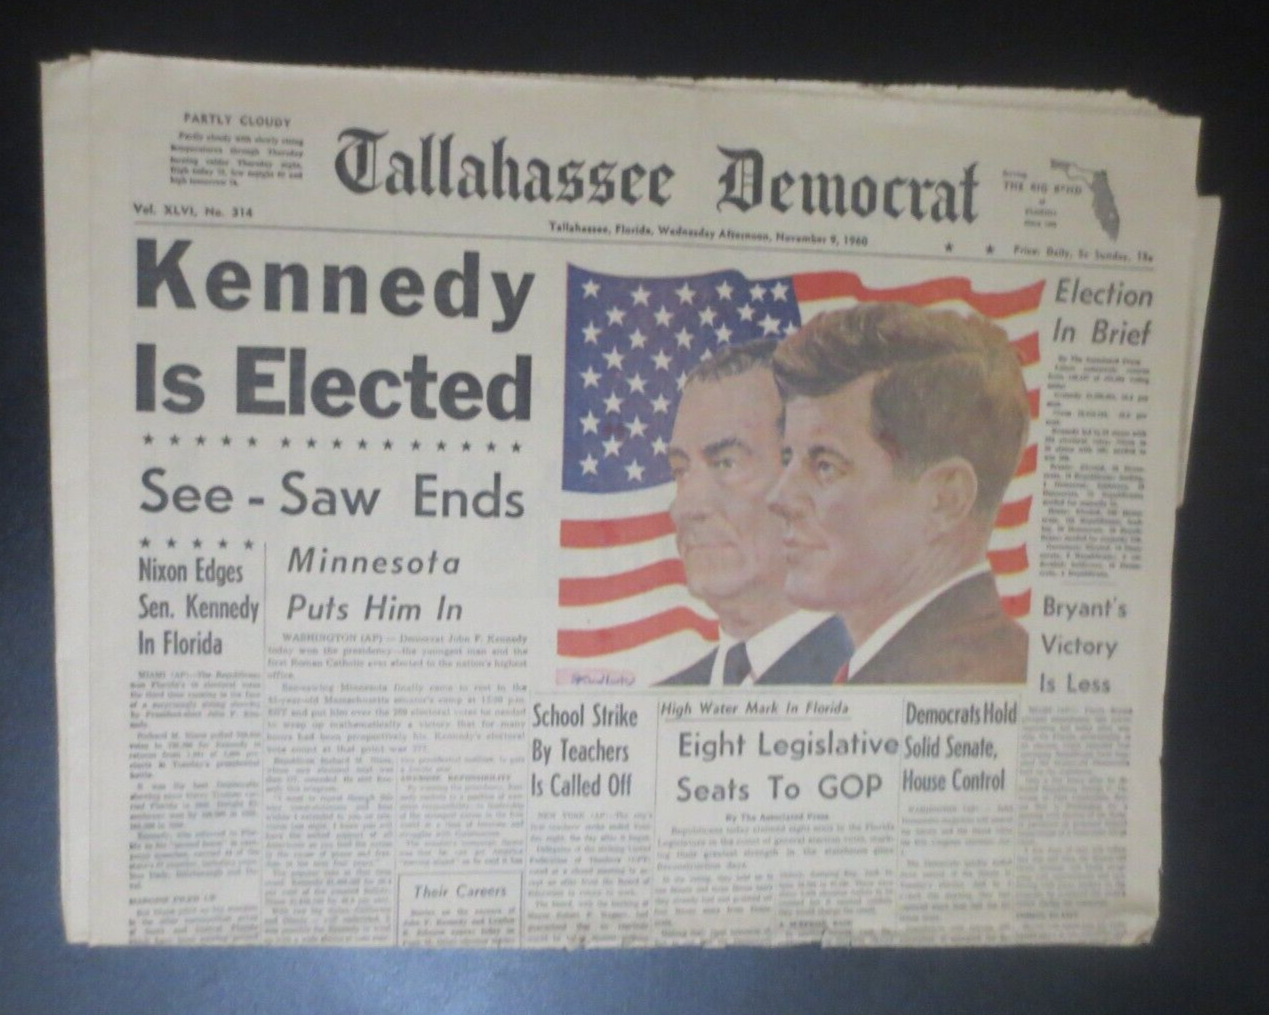 Tallahassee Democrat KENNEDY IS ELECTED  Nov 9, 1960 Newpaper 21 pgs 2 section